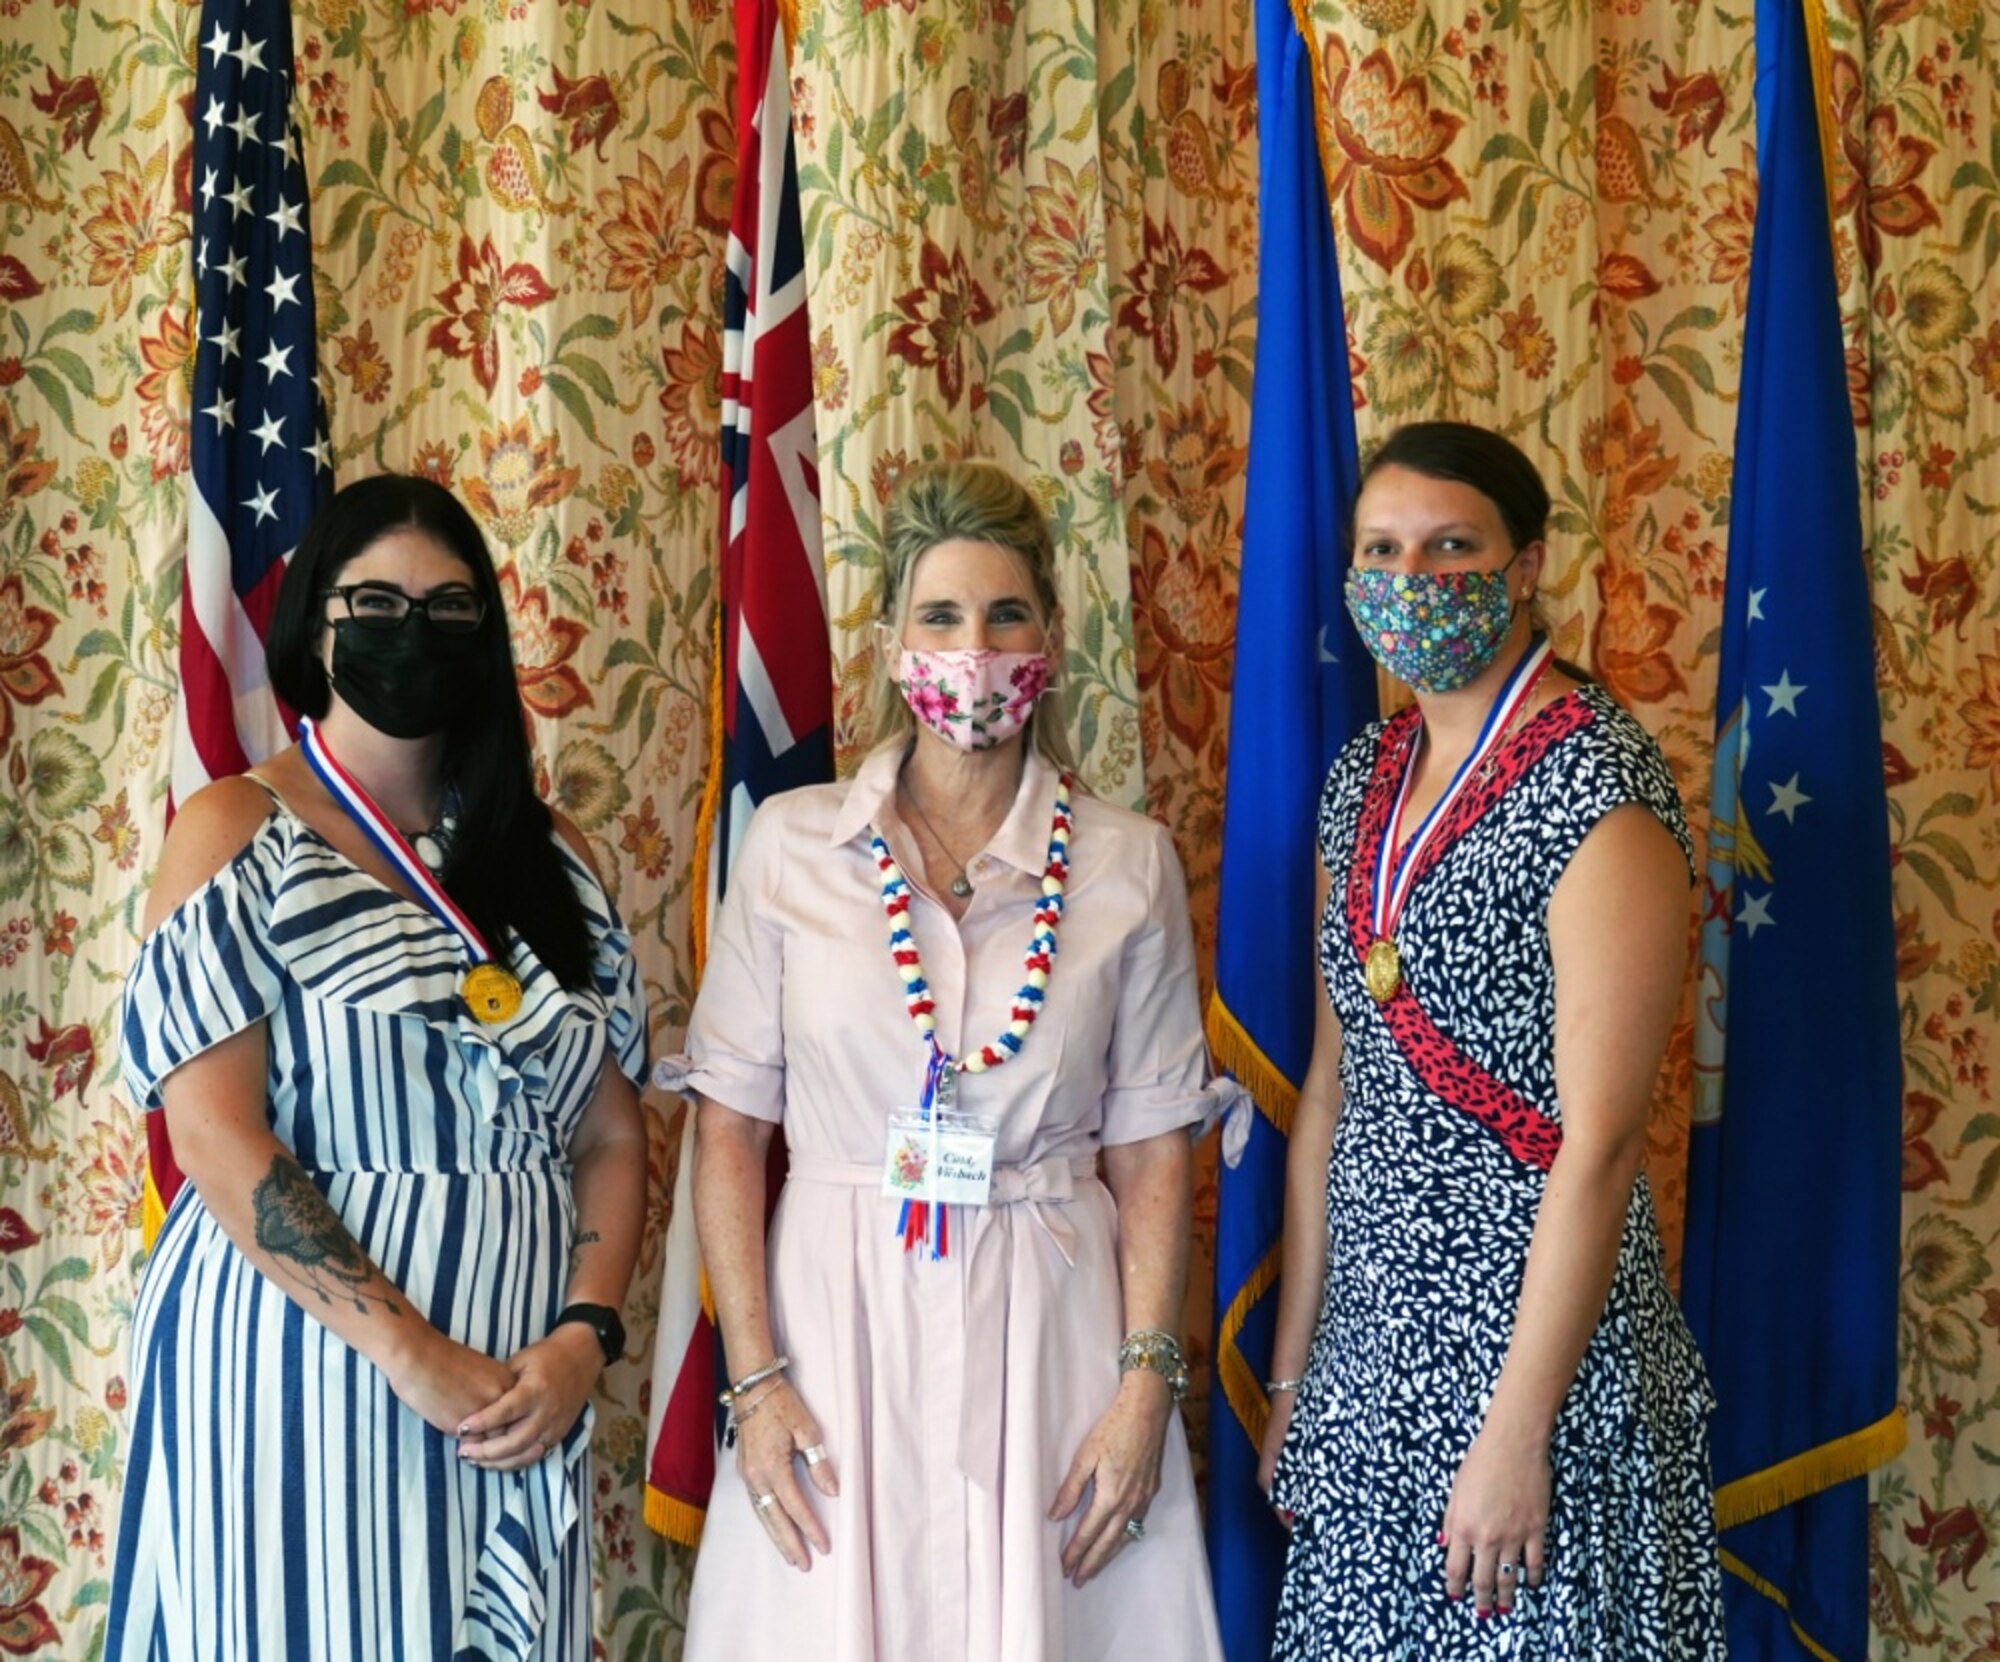 Mrs. Cindy Wilsbach, spouse of Gen. Ken Wilsbach, stands with Spouse Volunteer award winners, Mrs. Lexi Brown and Mrs. Caroline McGrath, at the Ka Makani Community Center, Joint Base Pearl Harbor-Hickam, Hawaii, Sept. 28, 2020. These military spouses displayed leadership and forward-thinking, and based on their contributions were nominated by their spouses’ units to earn these awards. (U.S. Air Force photo by Airman 1st Class Erin Baxter)